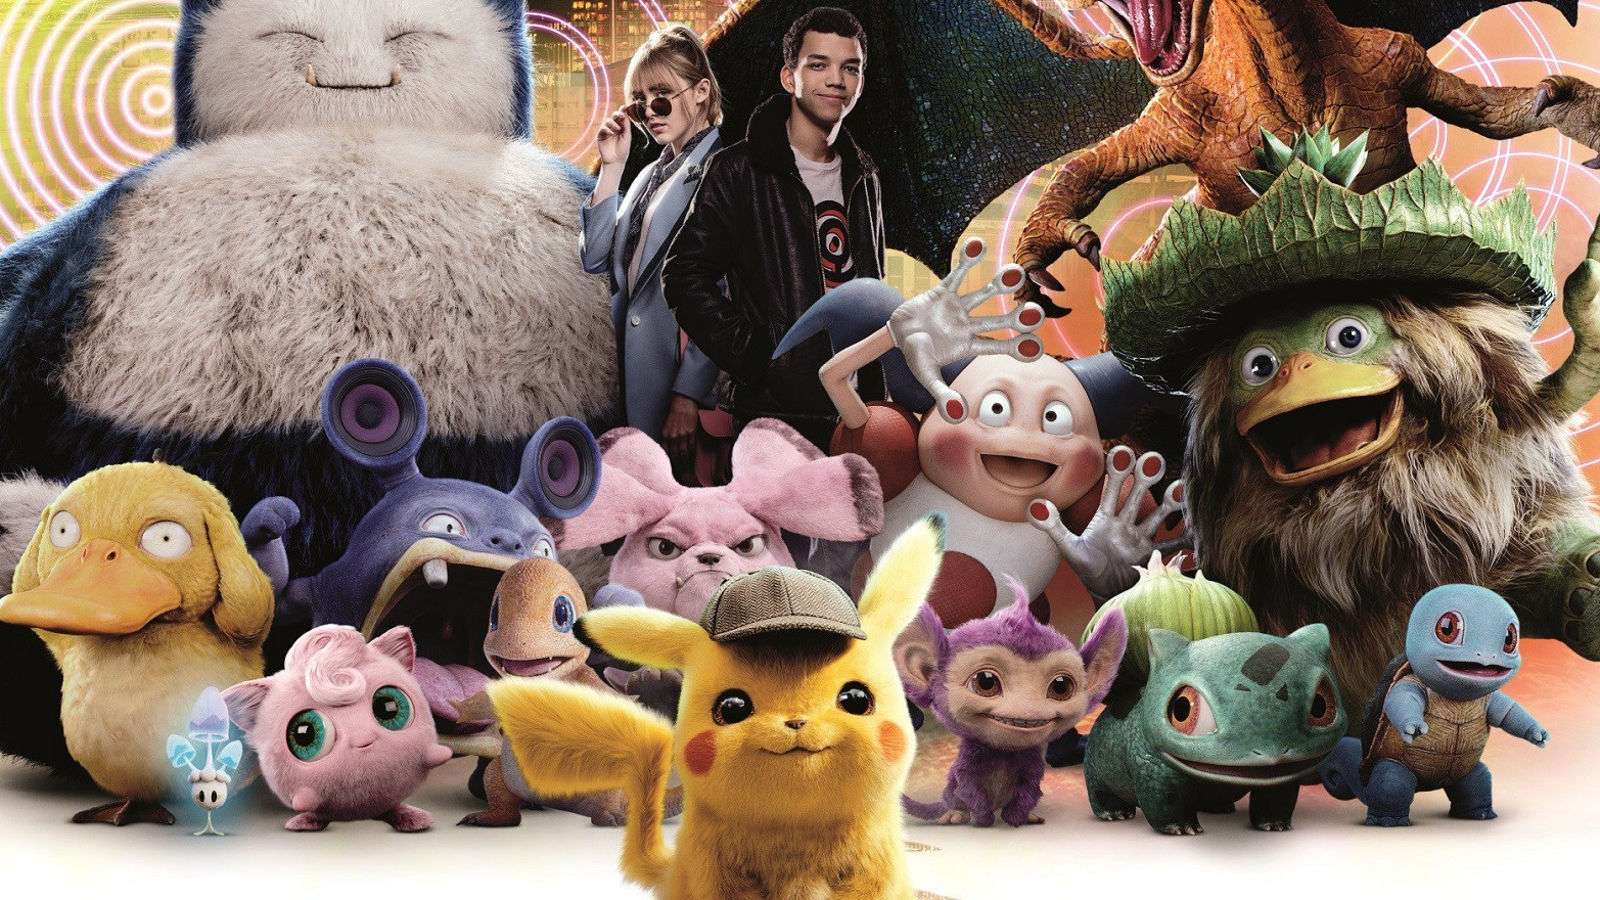 Detective Pikachu surrounded by Pokemon